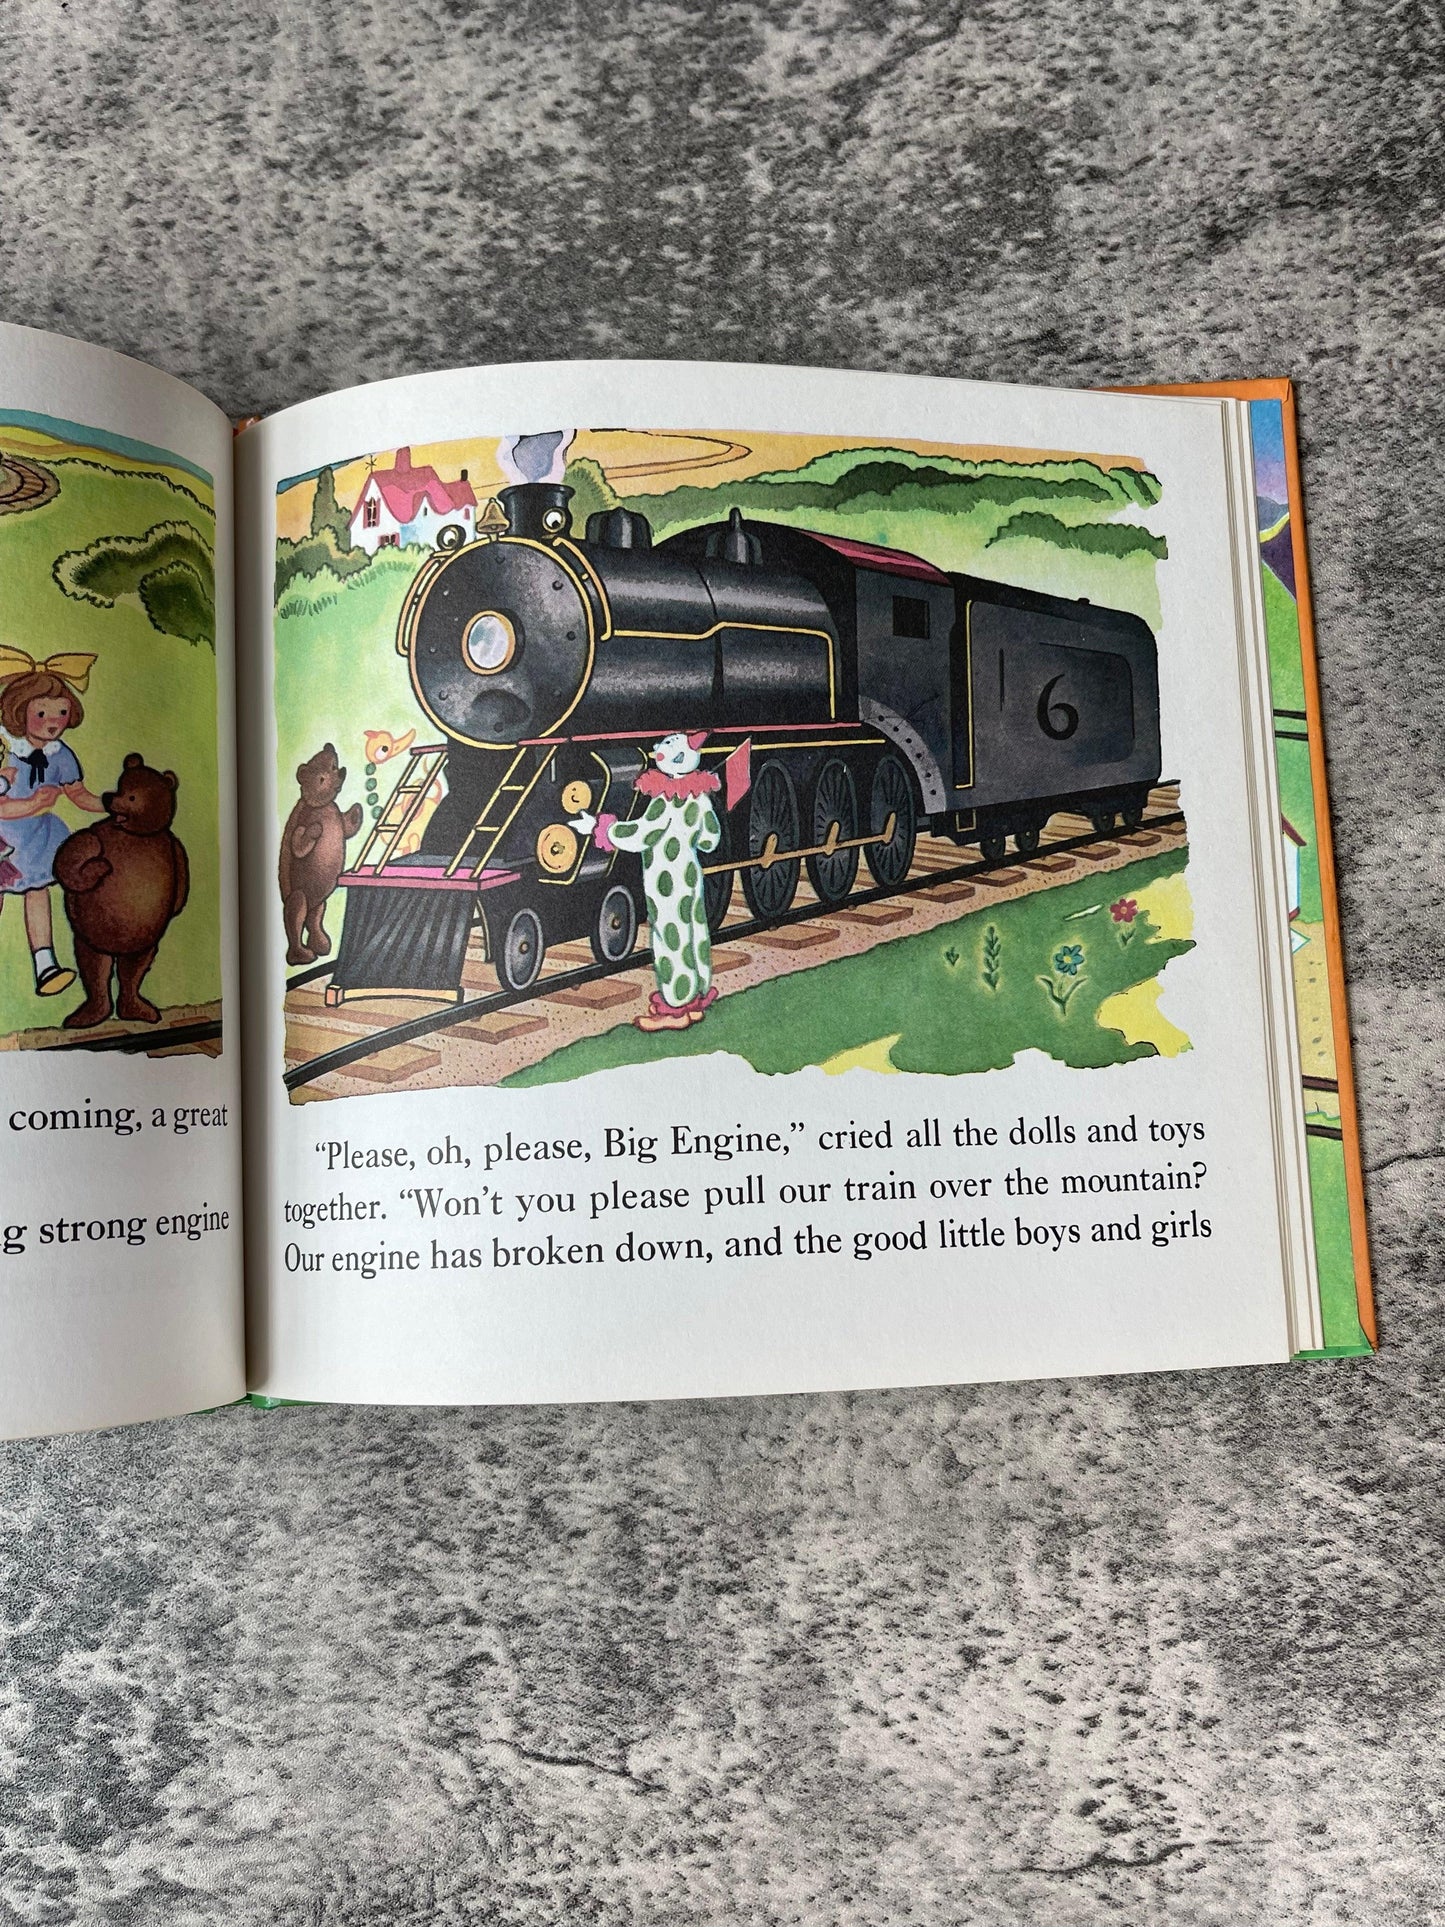 The Little Engine That Could / Original Edition / 1987 - Precious Cache